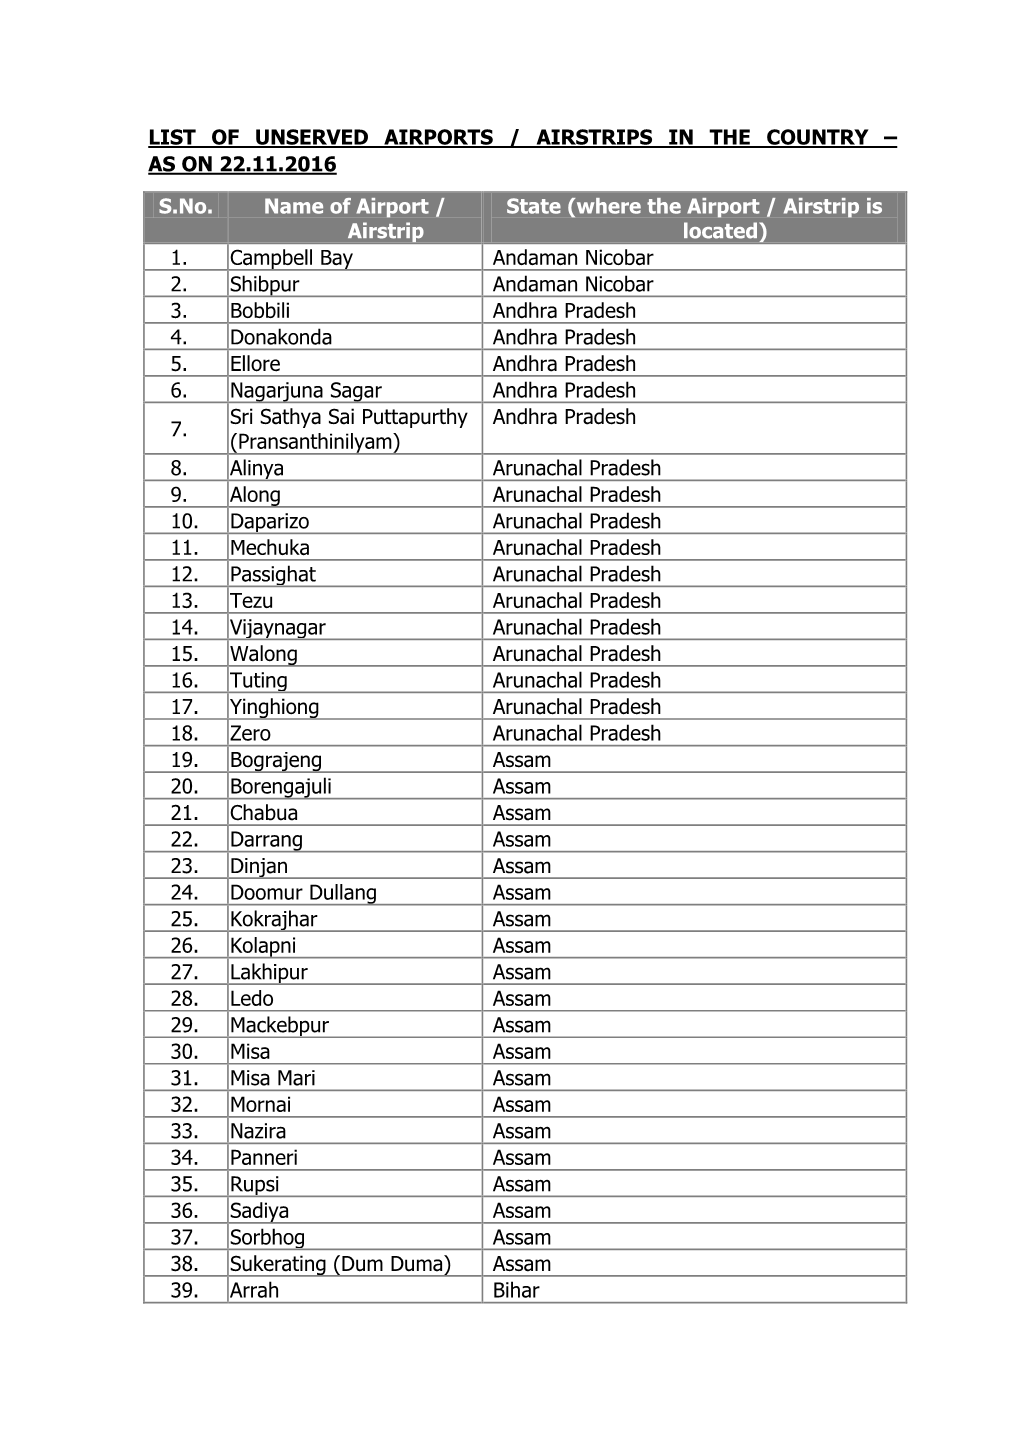 List of Unserved Airports / Airstrips in the Country – As on 22.11.2016